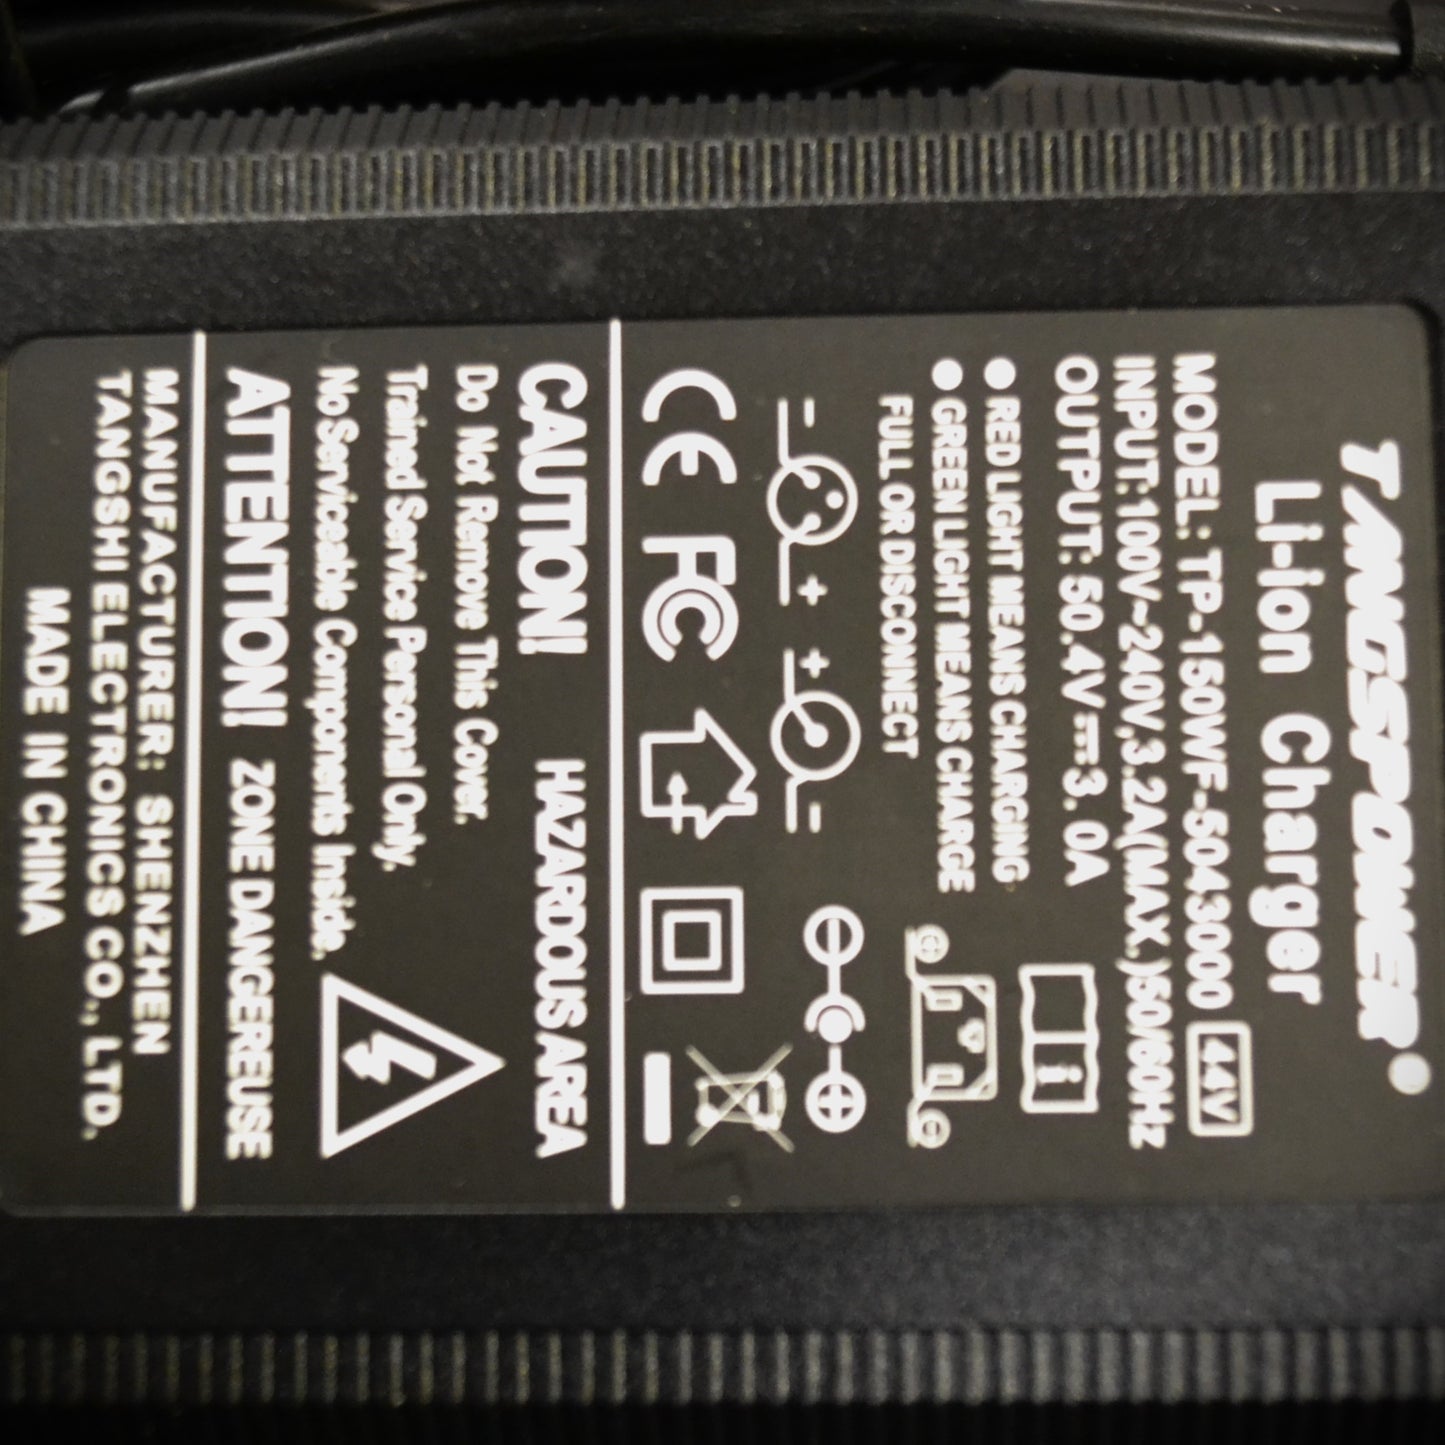 Charger - 12S (50.4V) 3 Amp - Lithium Ion